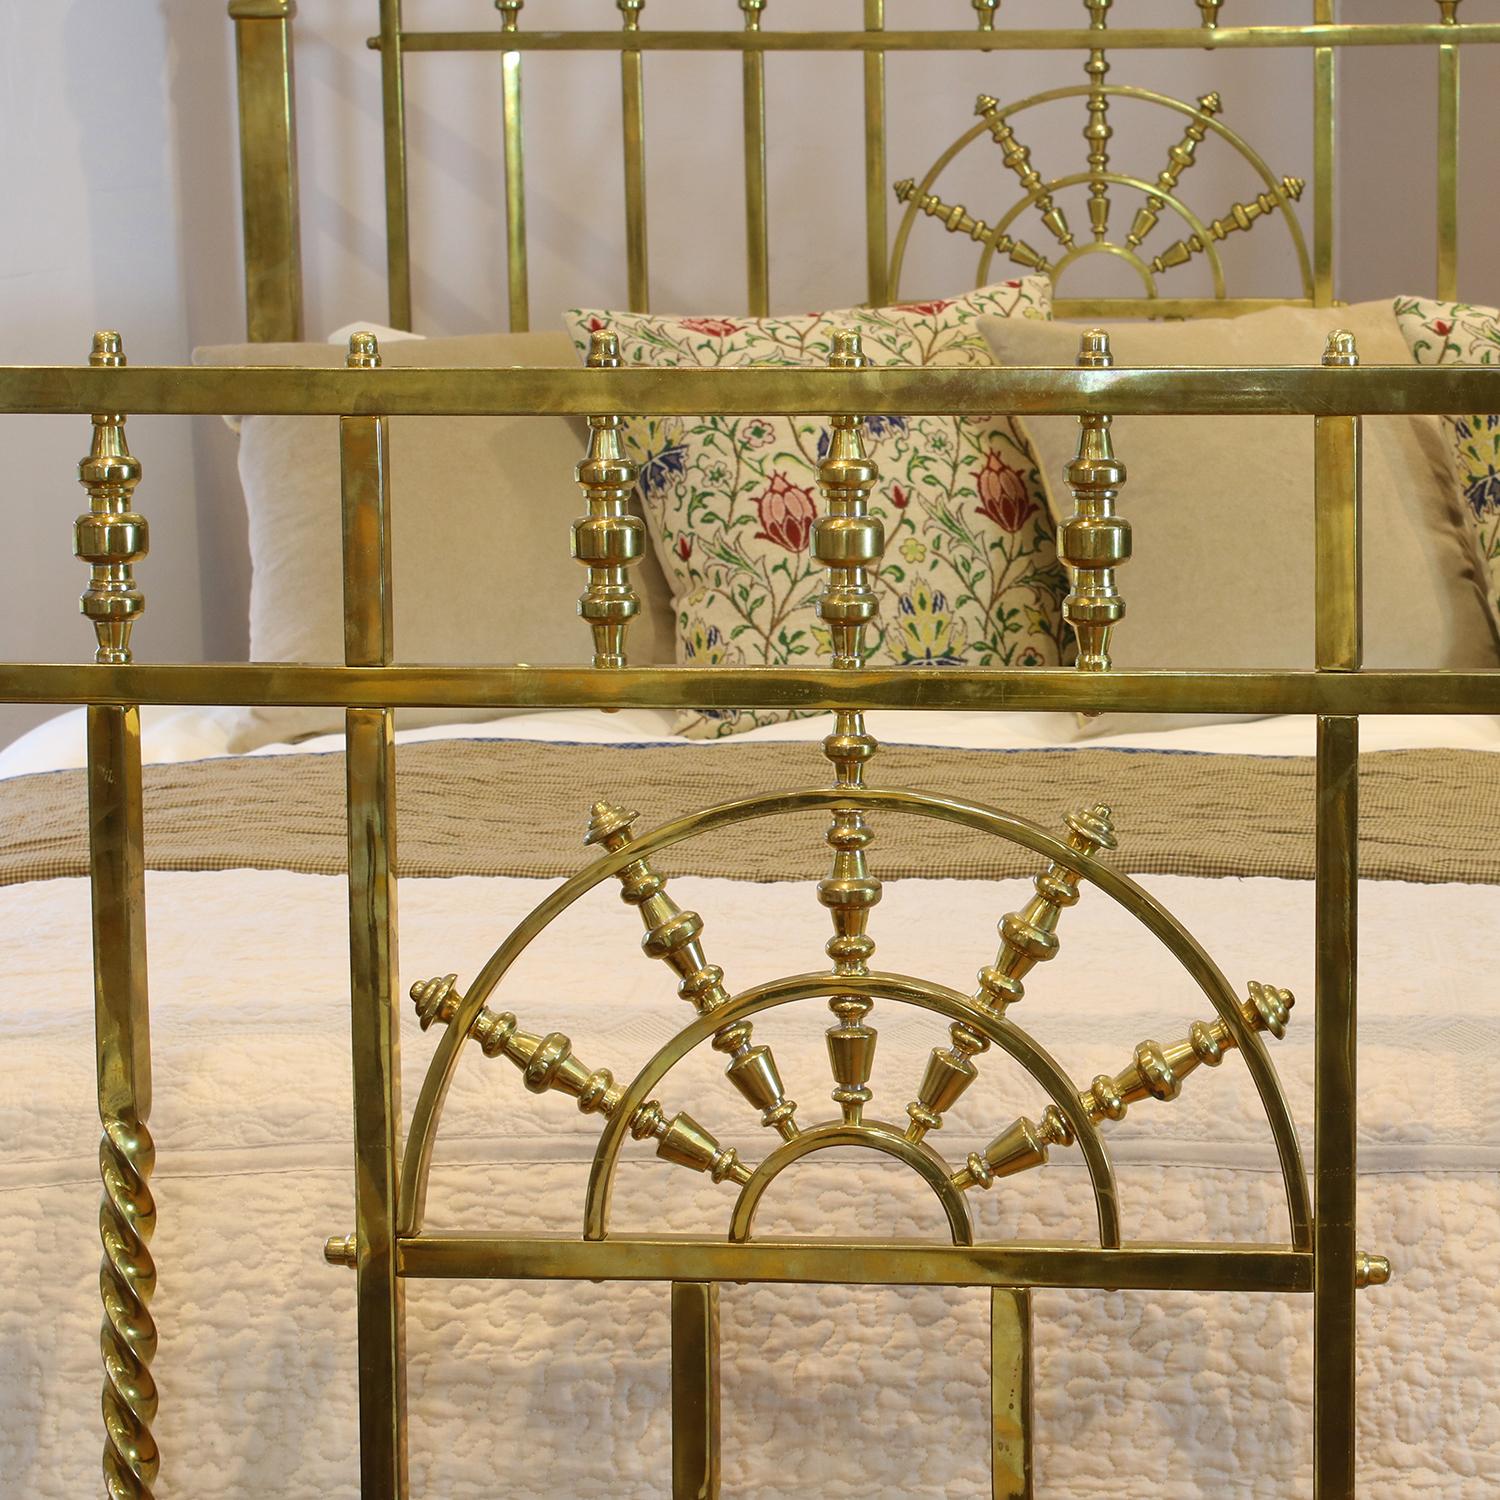 A superb top quality all brass Victorian antique bed with square-section brass tubing, barley twist elaboration, substantial brass sectioned posts, decorative brass castings and sunburst design in head and foot panels. This is one of the finest